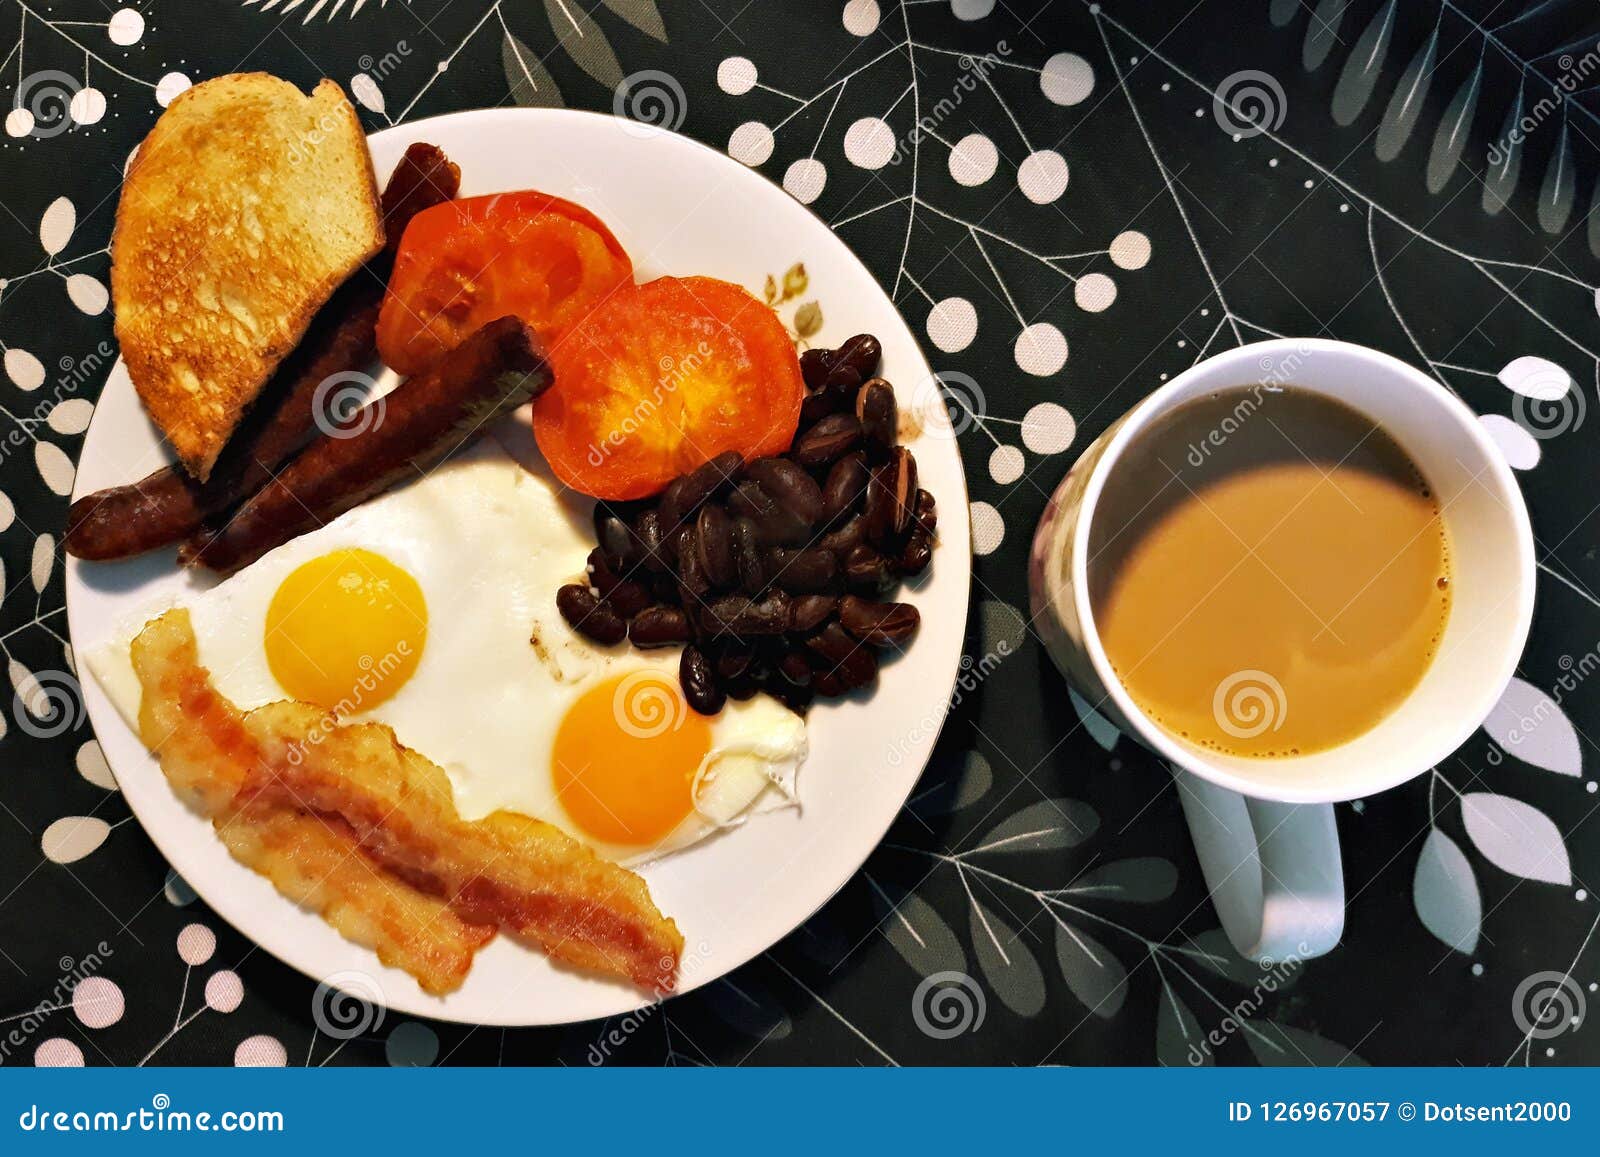 Fried Eggs, Sausages and Coffee. Stock Image - Image of cuisine, bacon ...